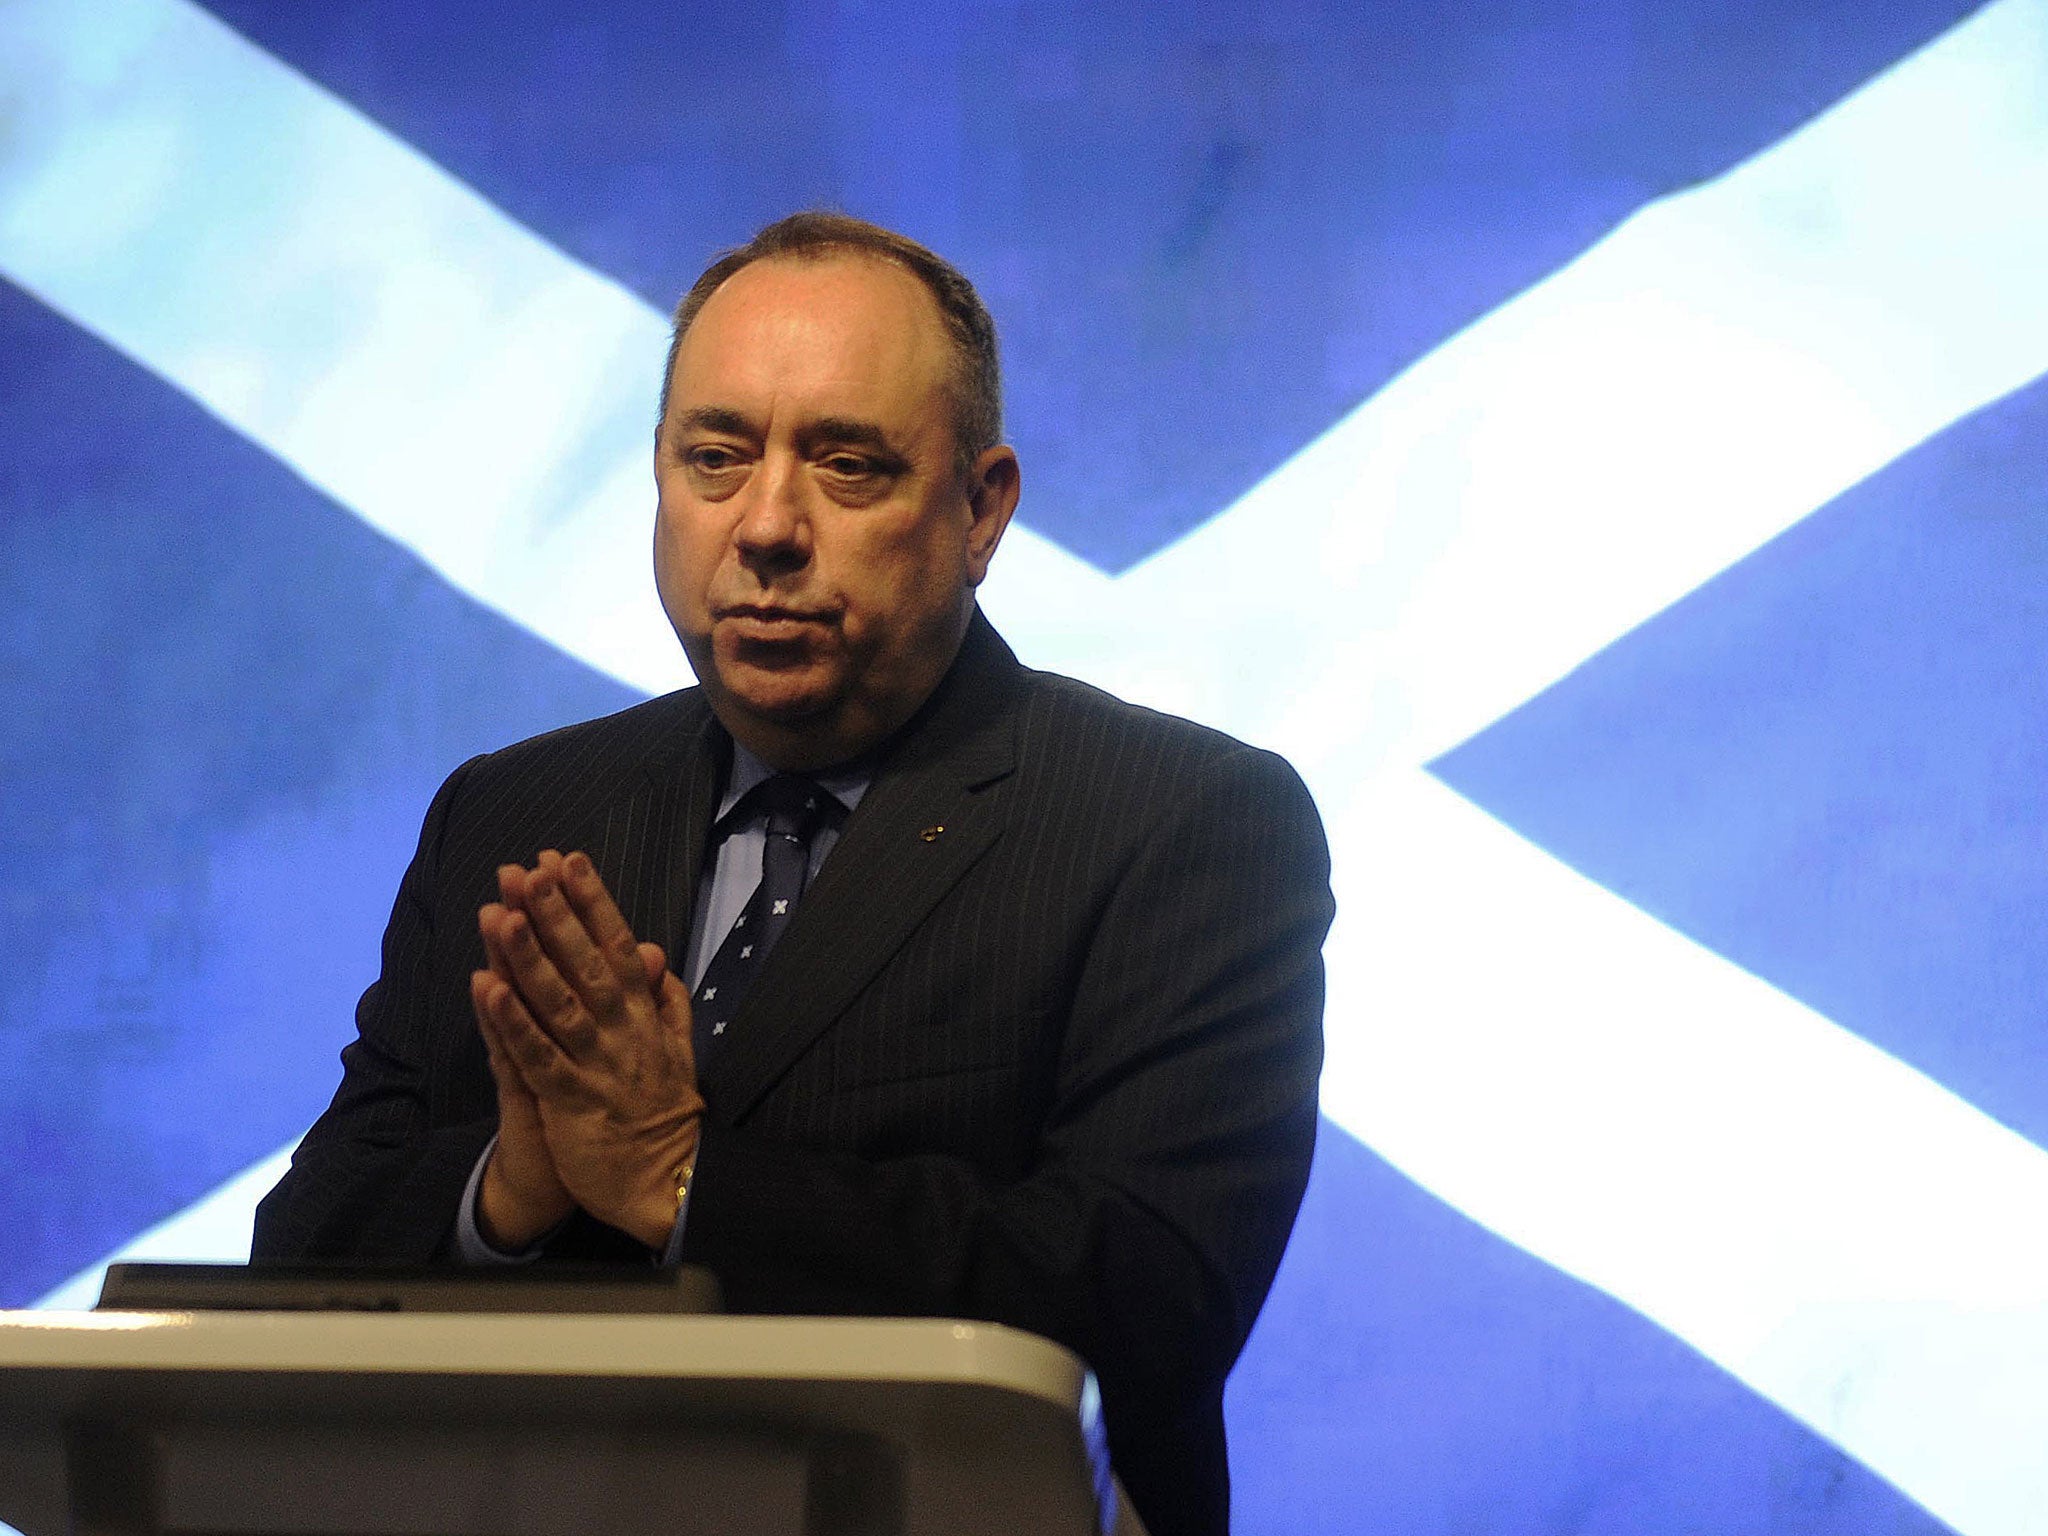 Scotland's First Minister Alex Salmond is campaigning for Scotland to leave the UK in a referendum to be held in 2014